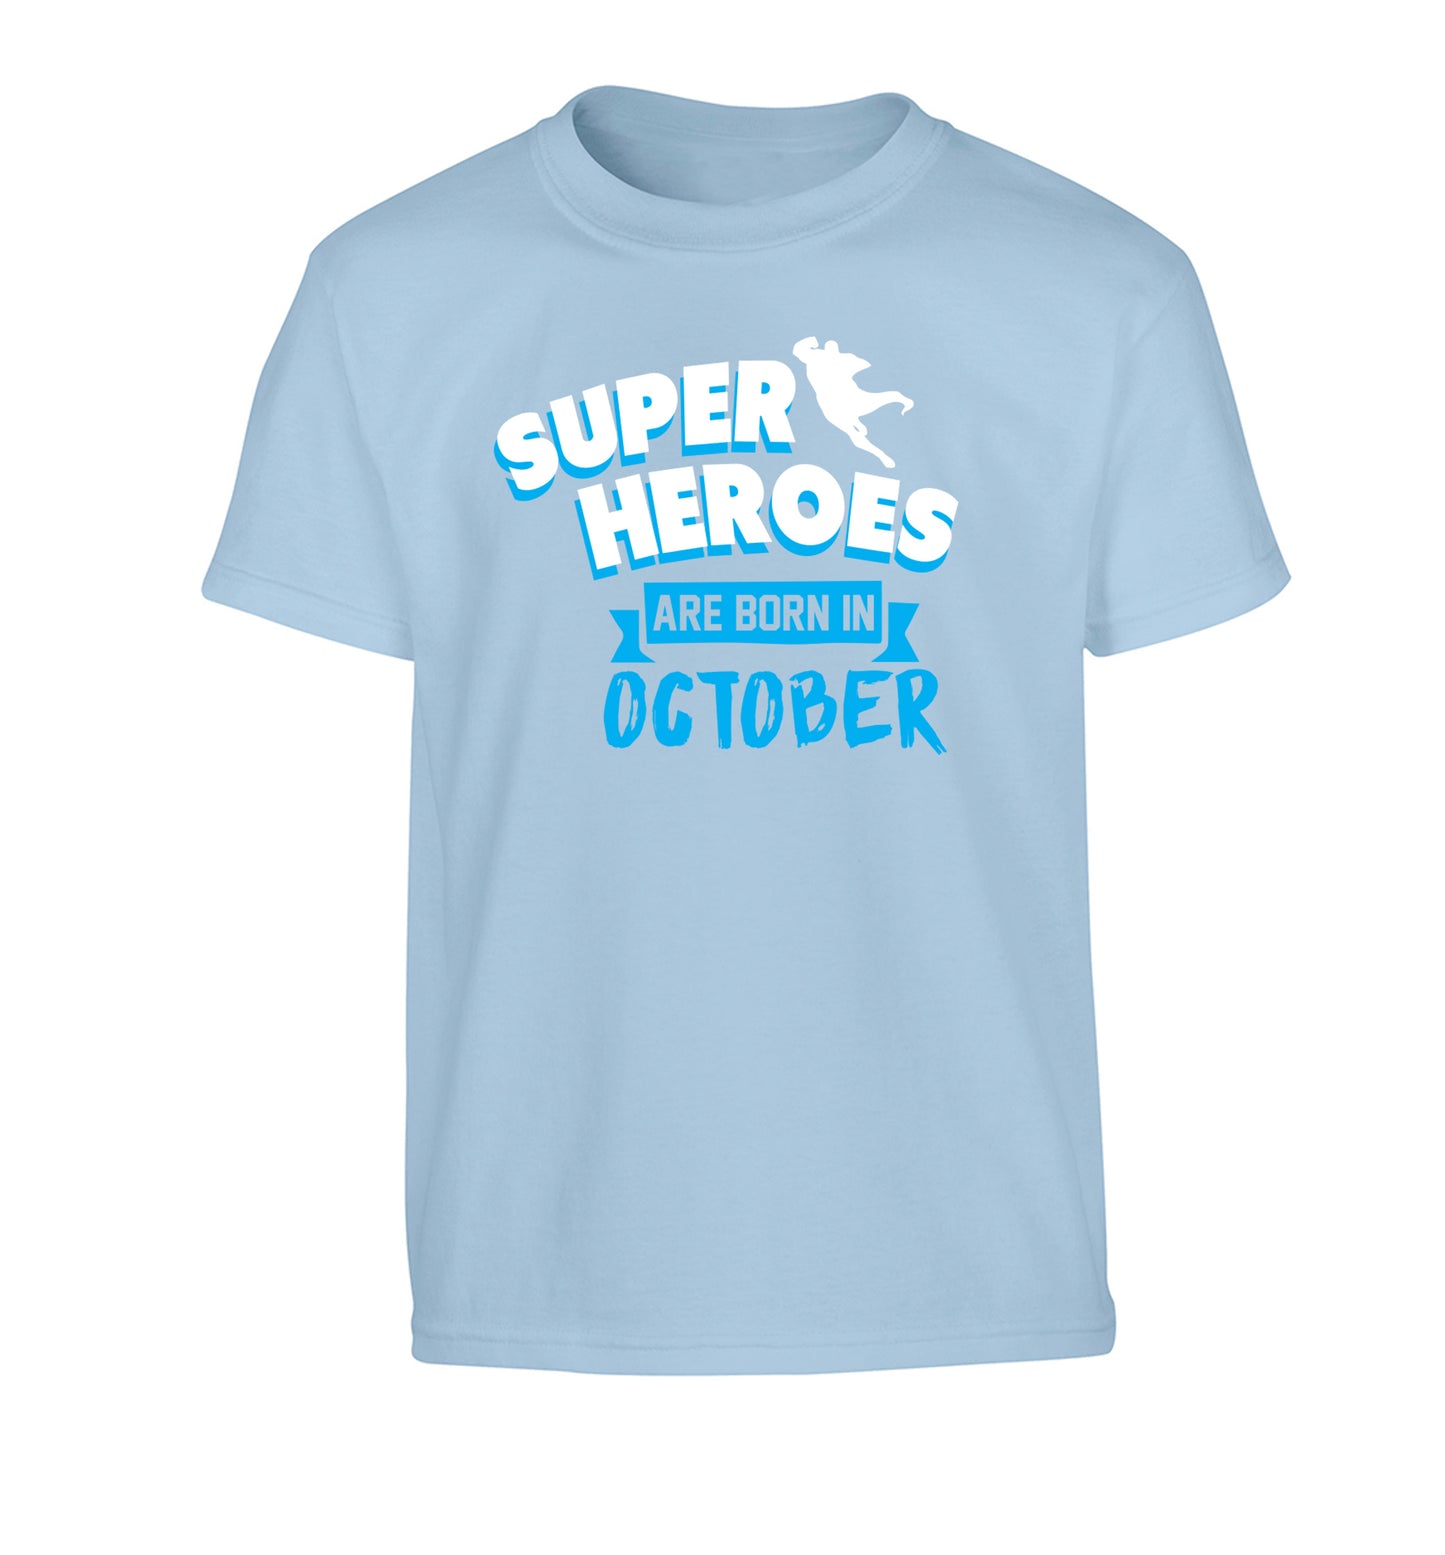 Superheroes are born in October Children's light blue Tshirt 12-13 Years